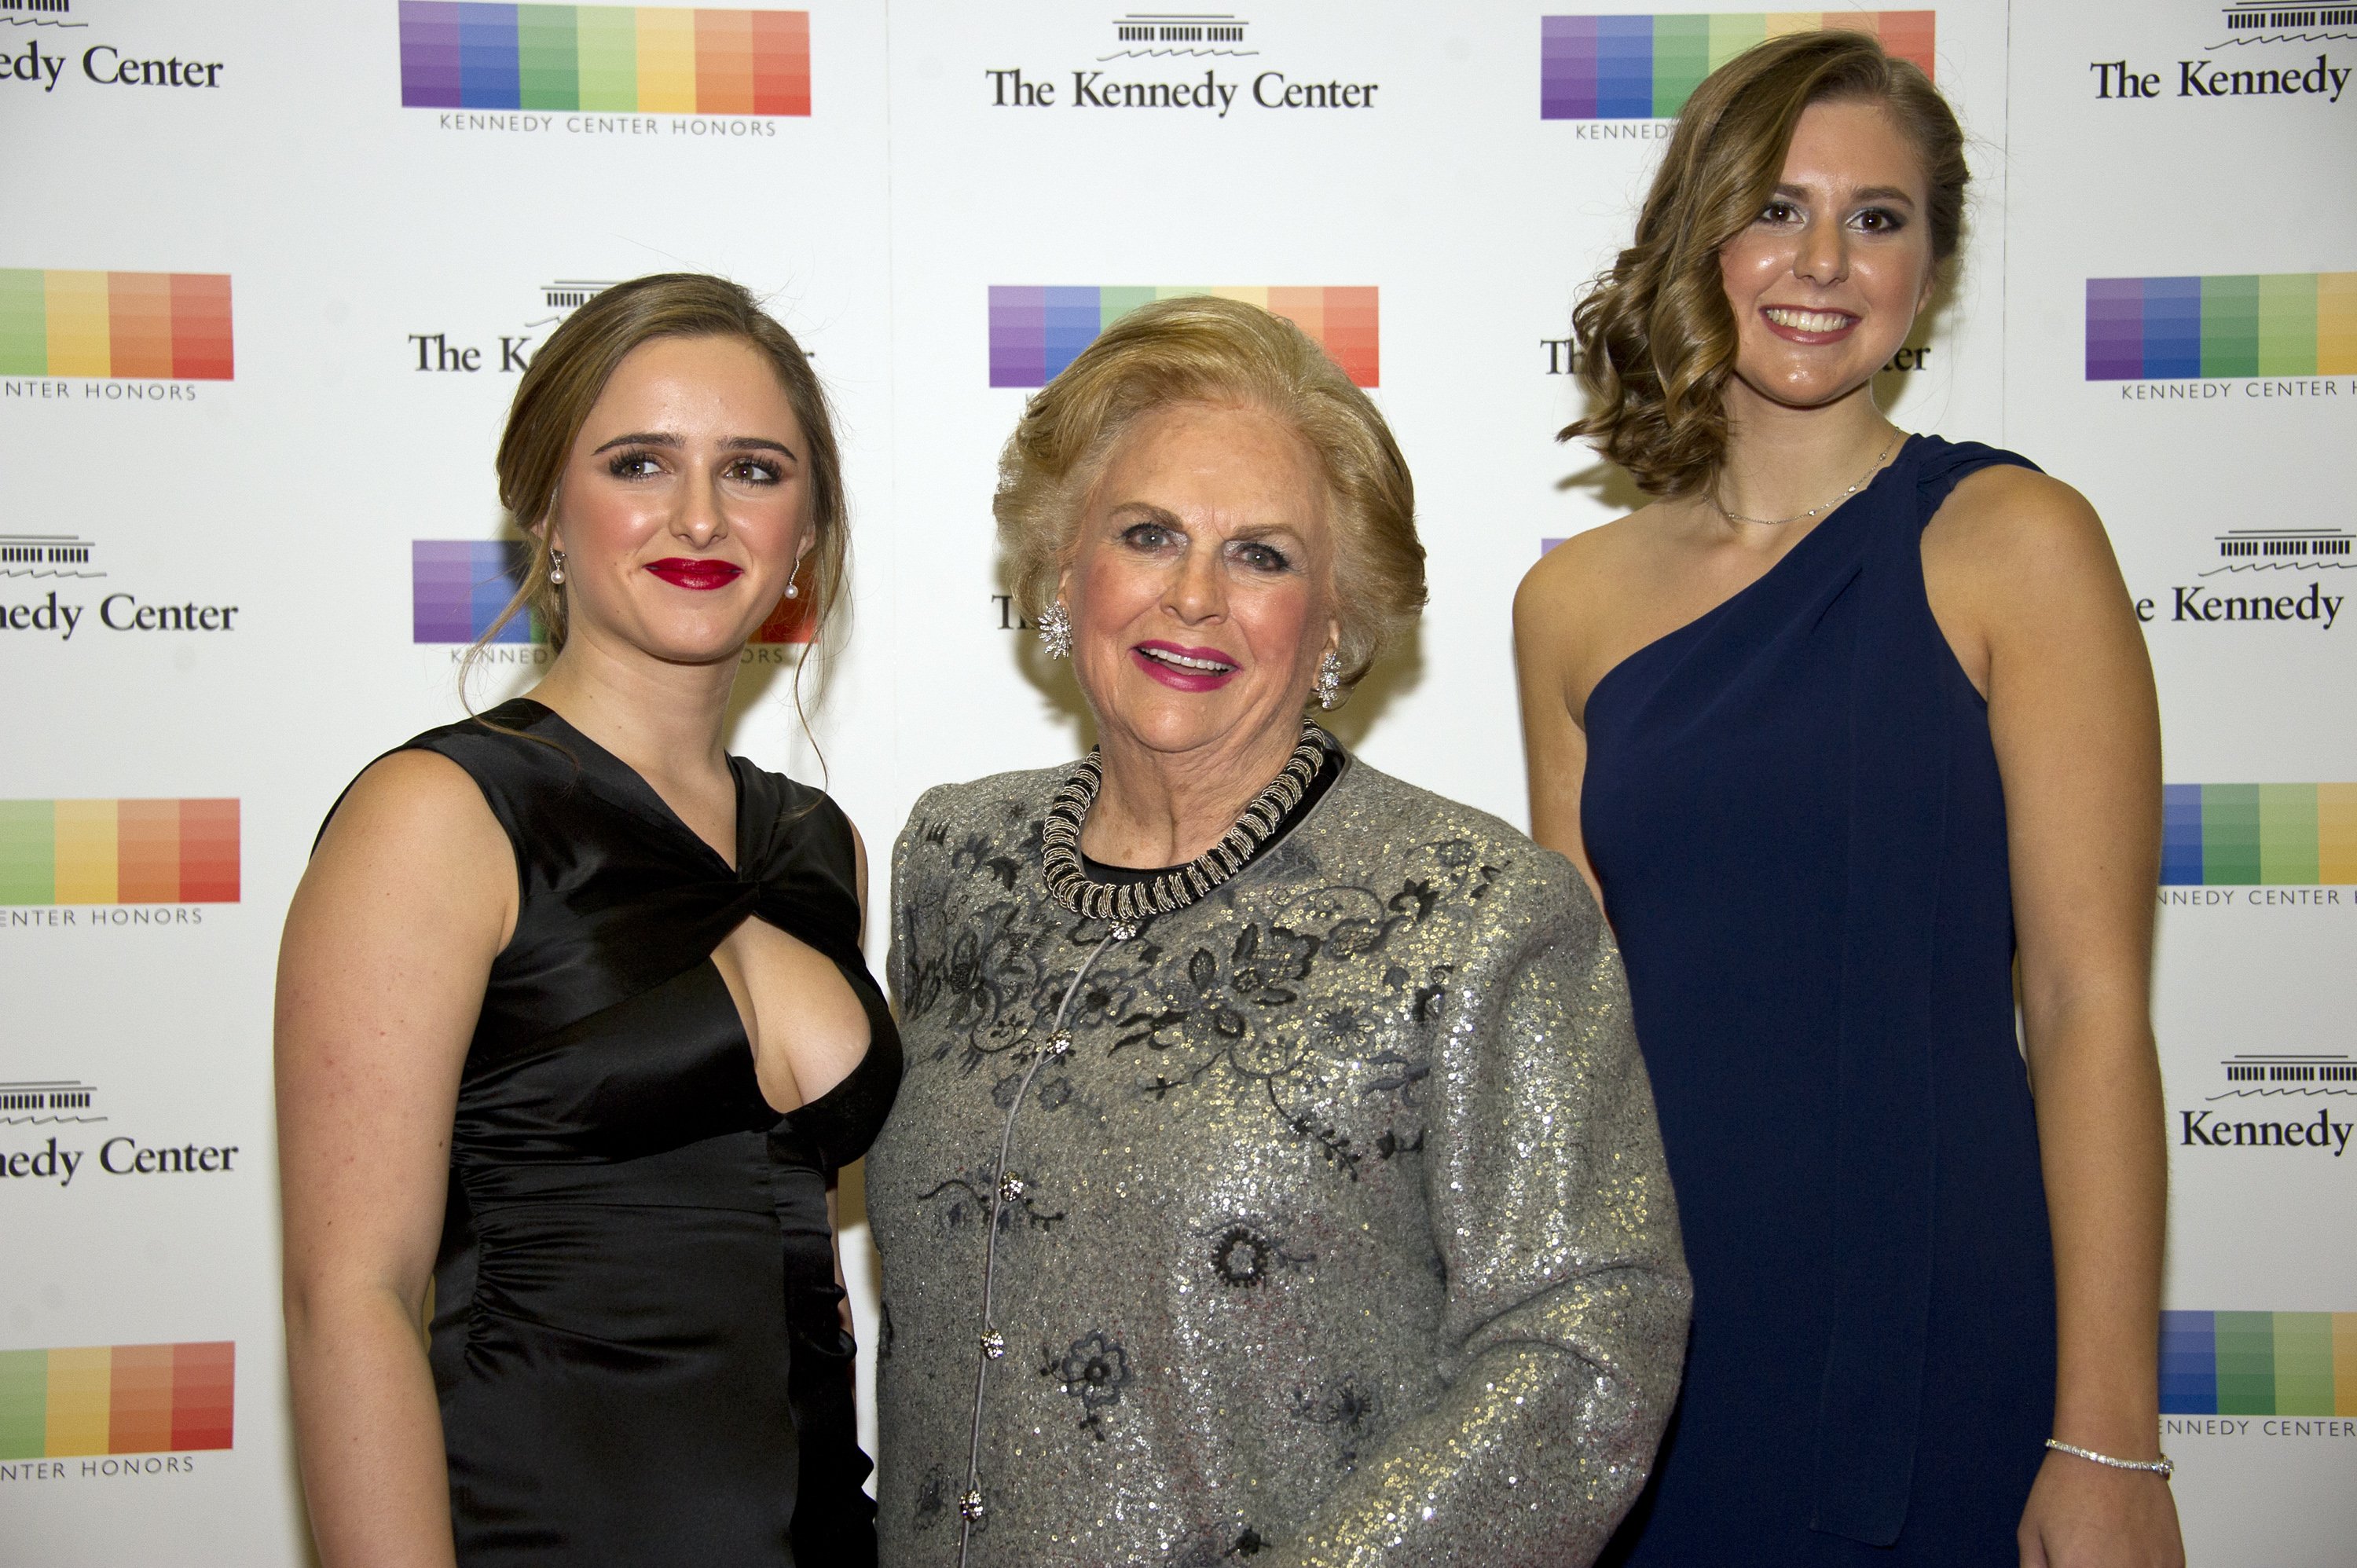  Jacqueline B. Mars and granddaughters Graysen Airth  and Katherine Burgstahle rat the Artist's Dinner honoring the recipients of the 39th Annual Kennedy Center Honors in Washington, D.C. on December 3, 2016 | Photo: GettyImages